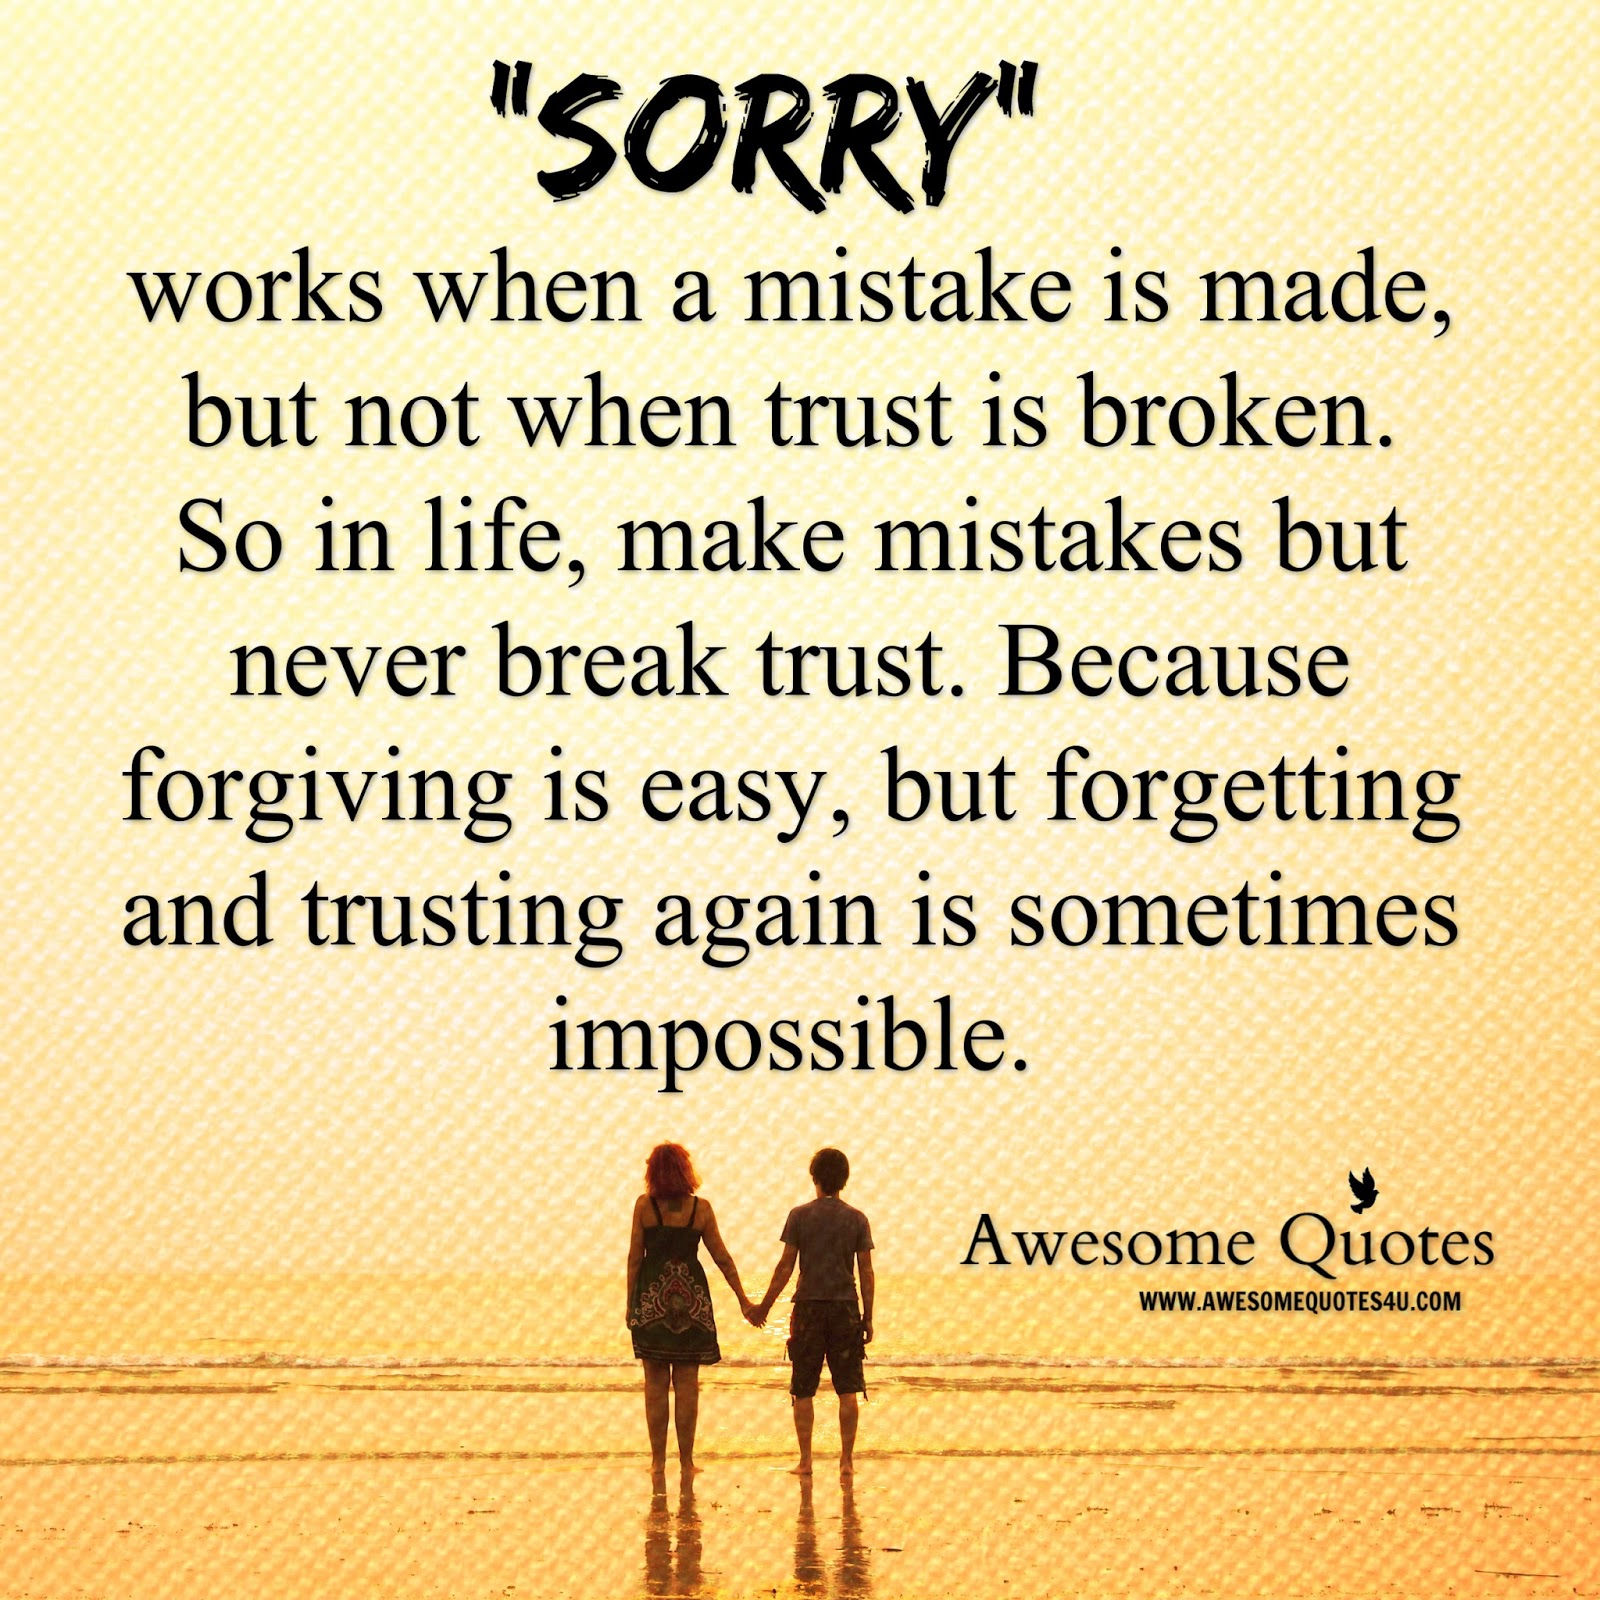 I find that sorry has an arbitrary meaning anymore People say it so often in life that when you mean it it s hard to differentiate when it s real